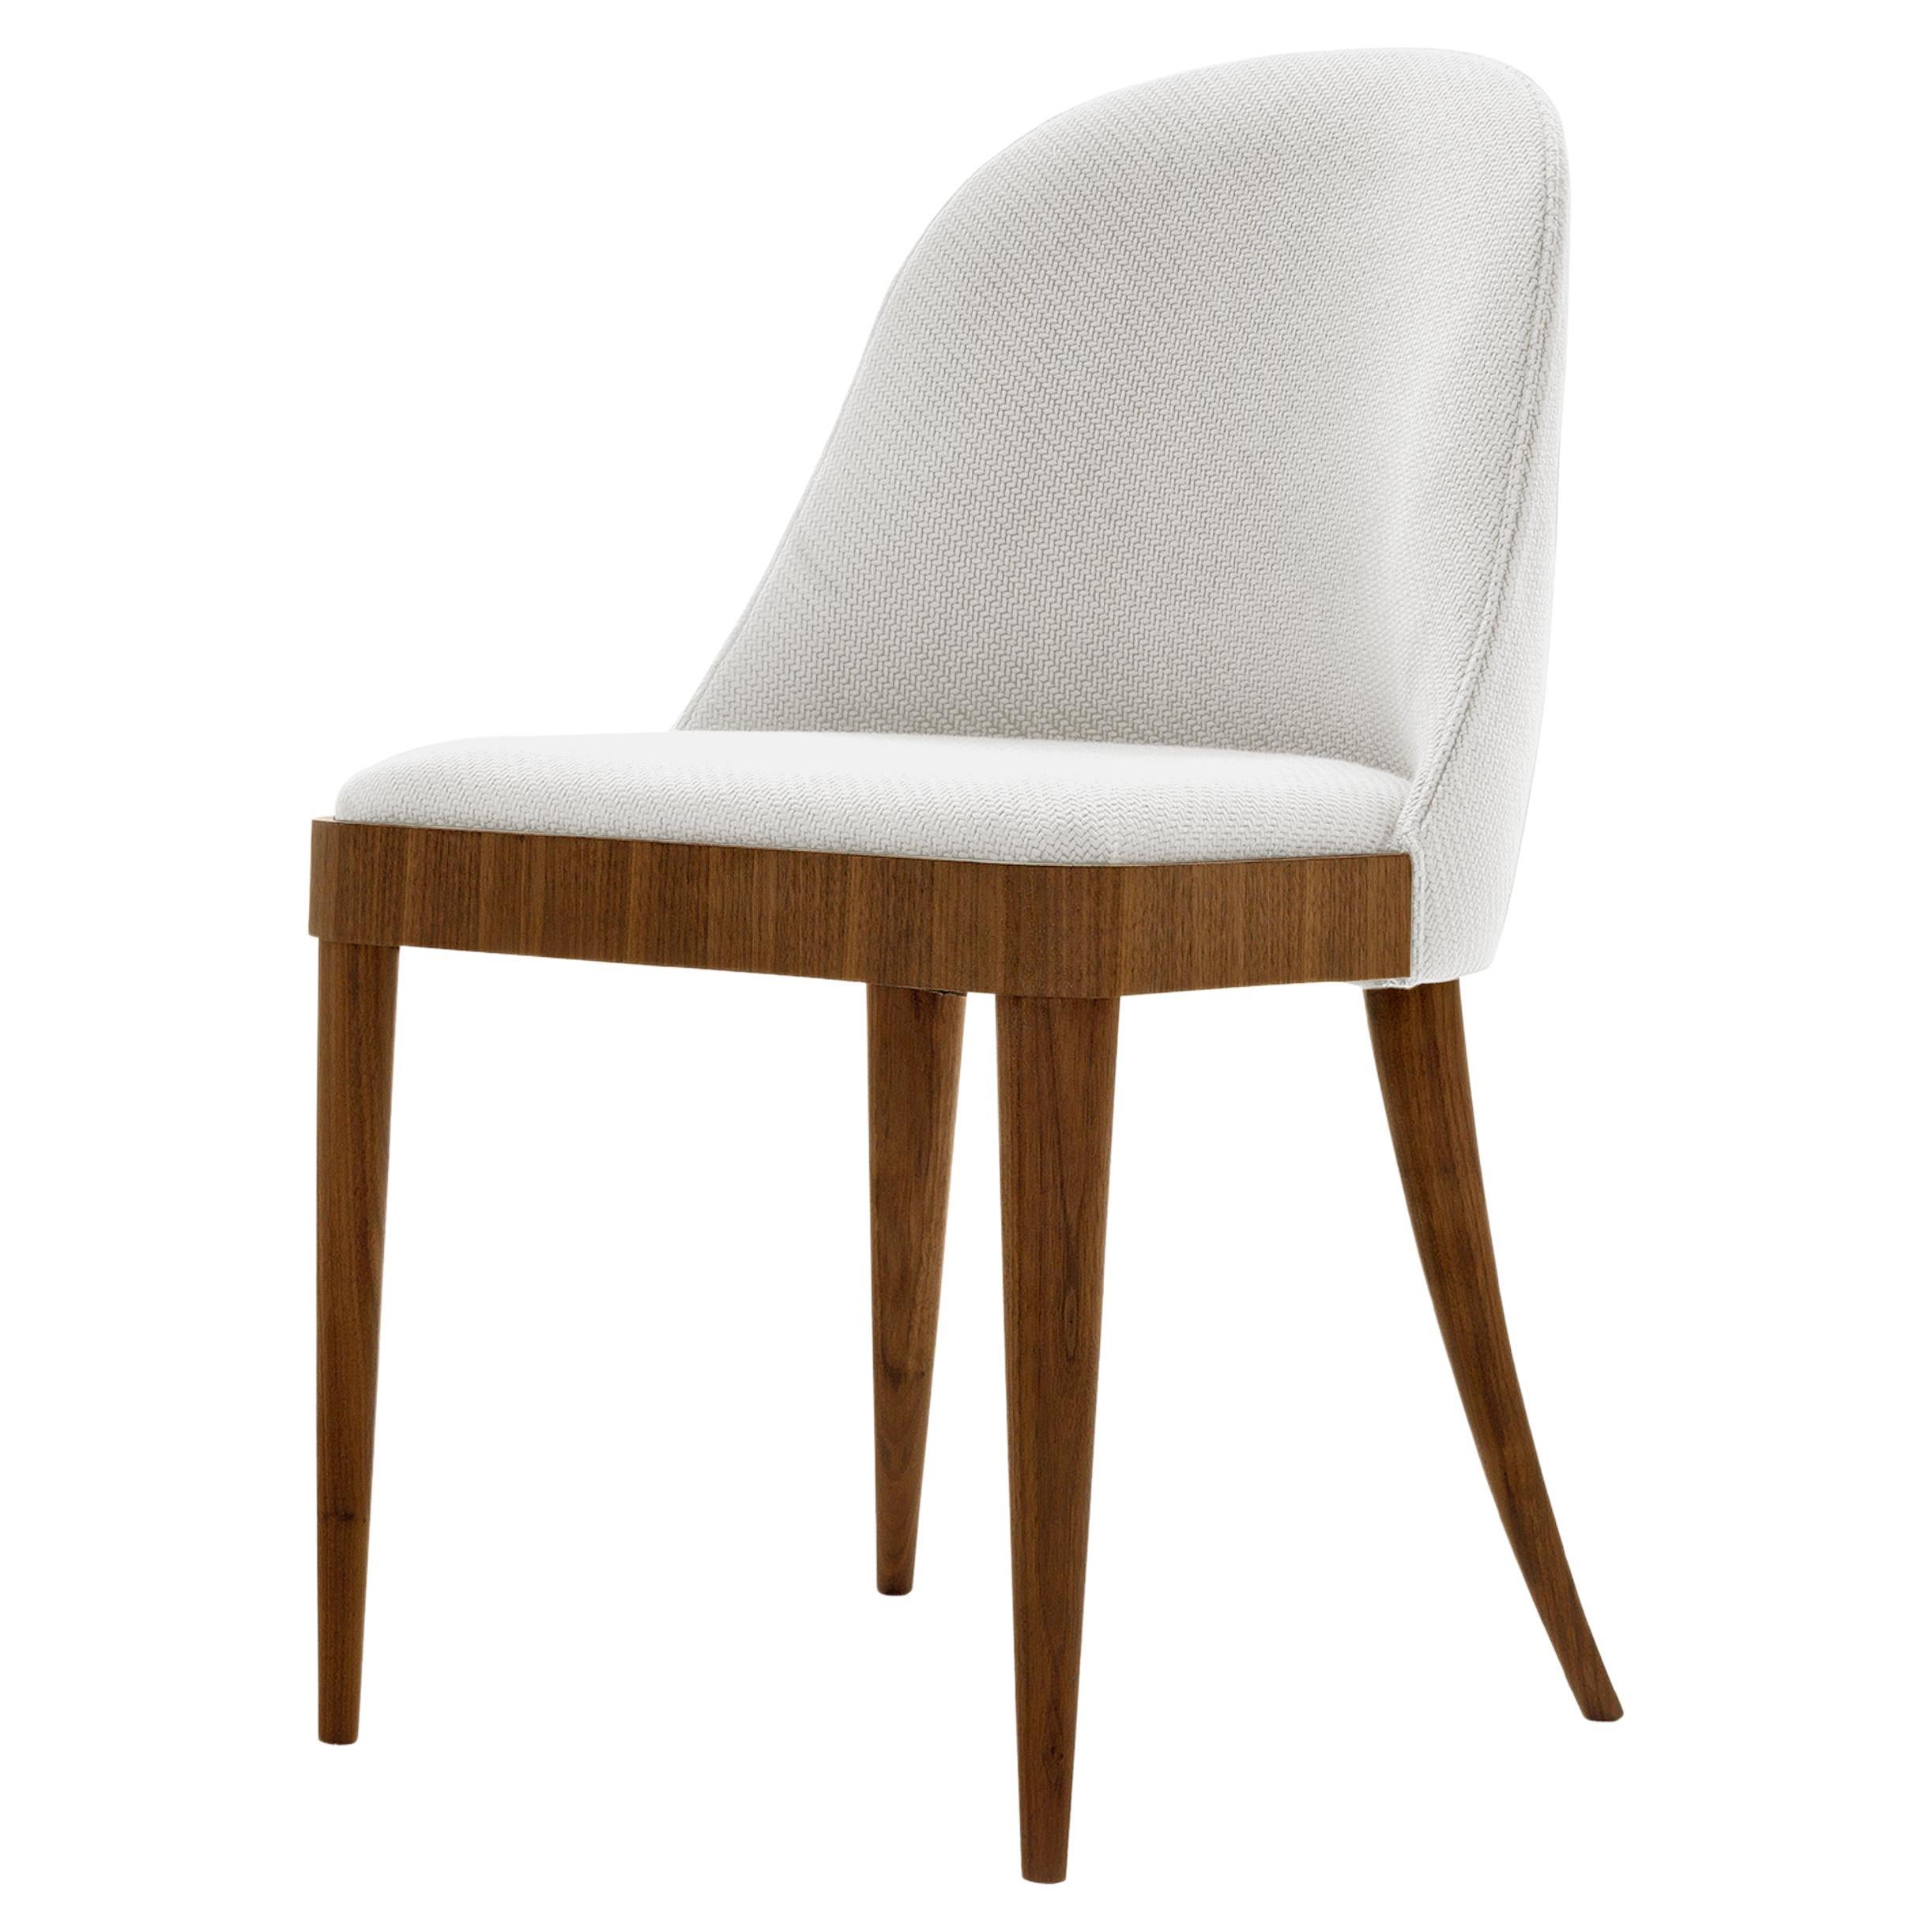 Cordiale Solid Wood Chair, Walnut in Hand-Made Natural Finish, Contemporary